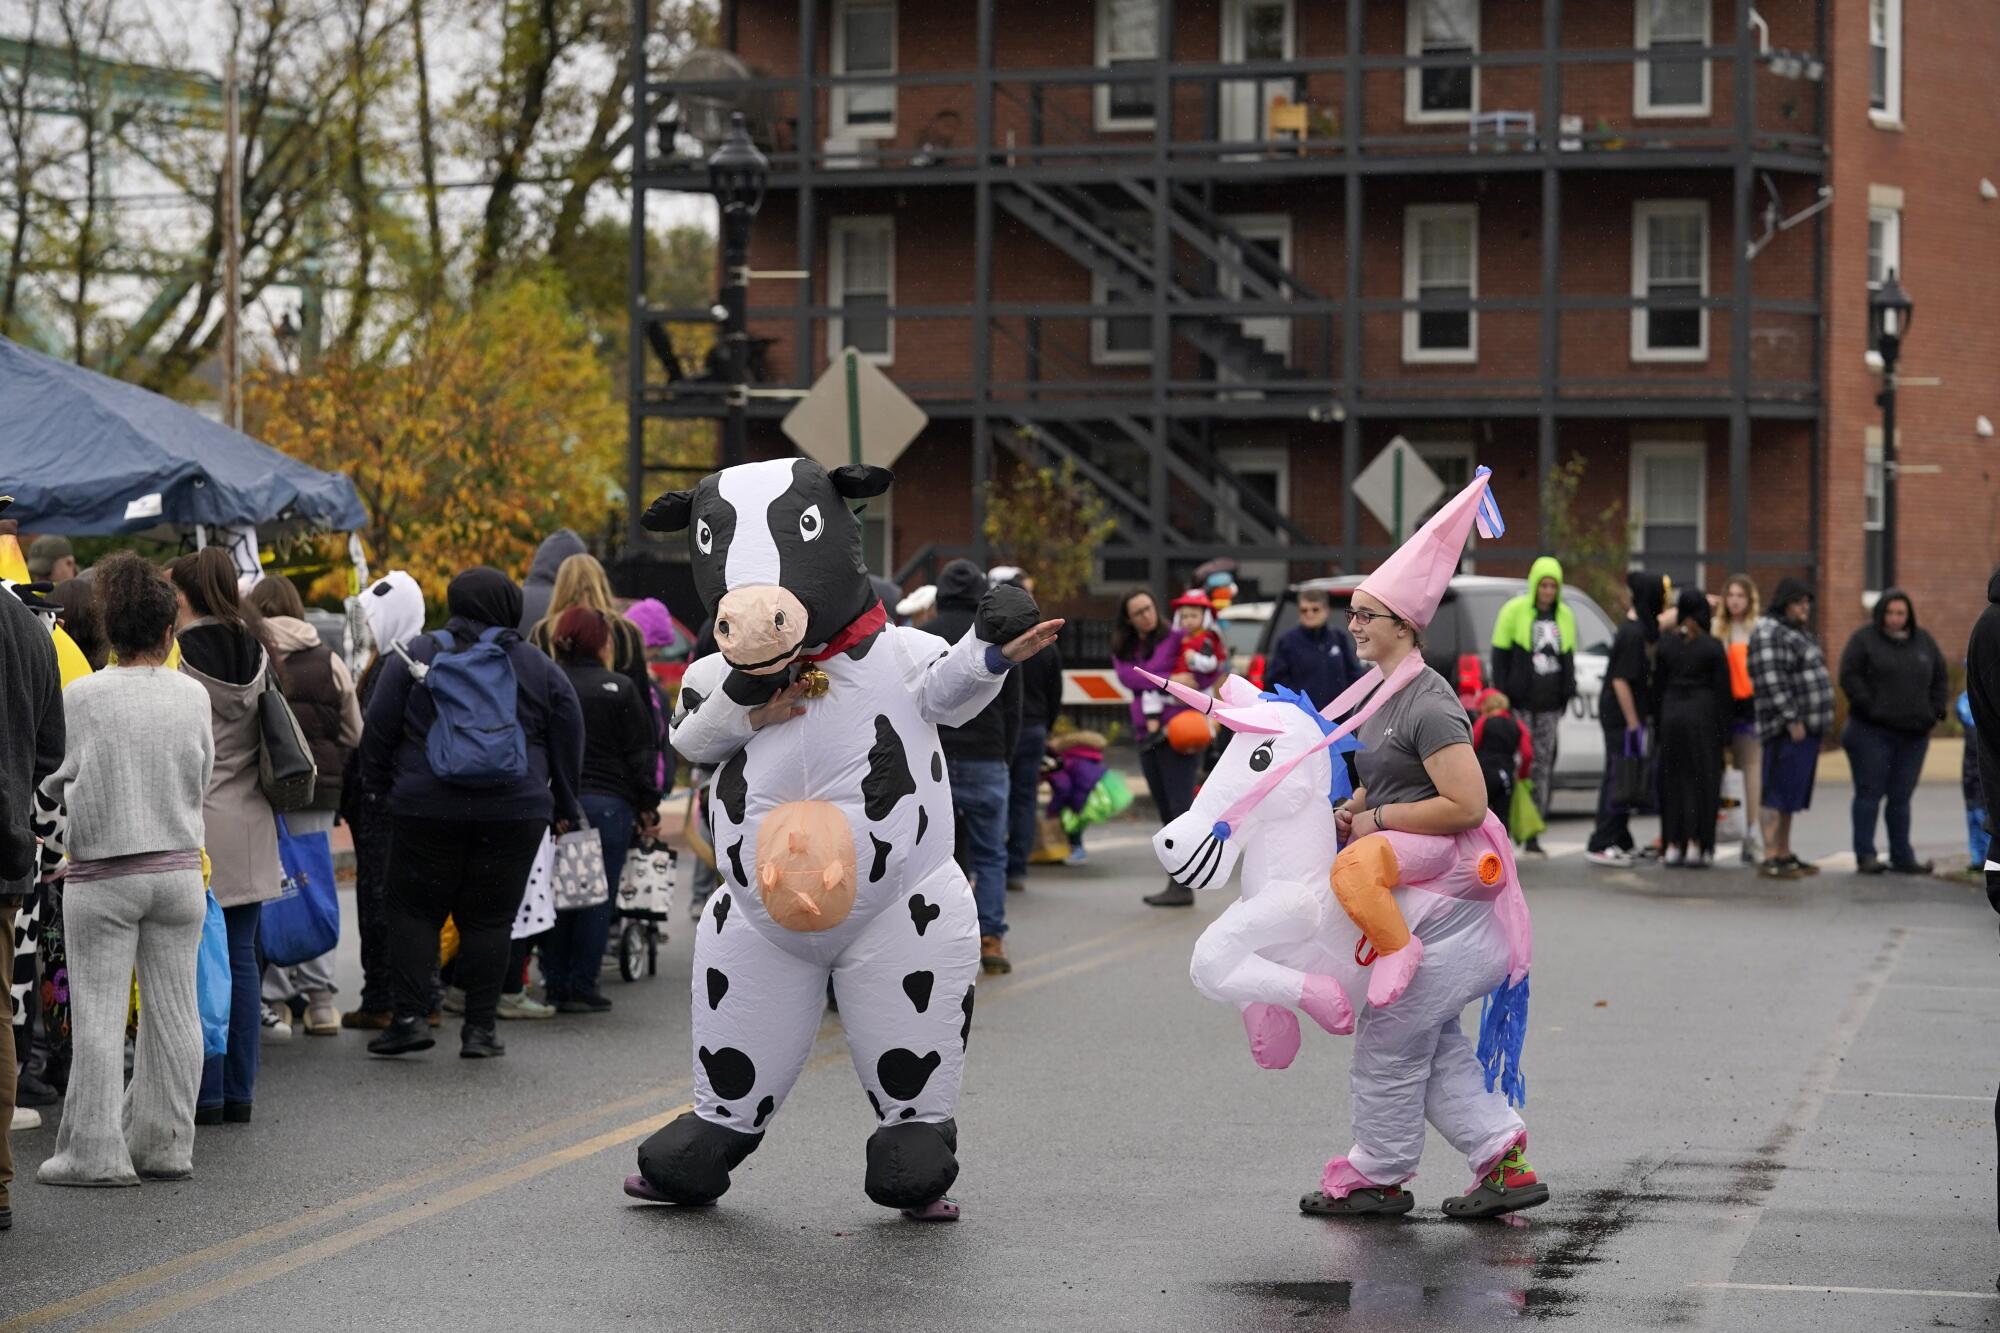 People dressed up as a cow and a unicorn rider dance next to a crowd in a street